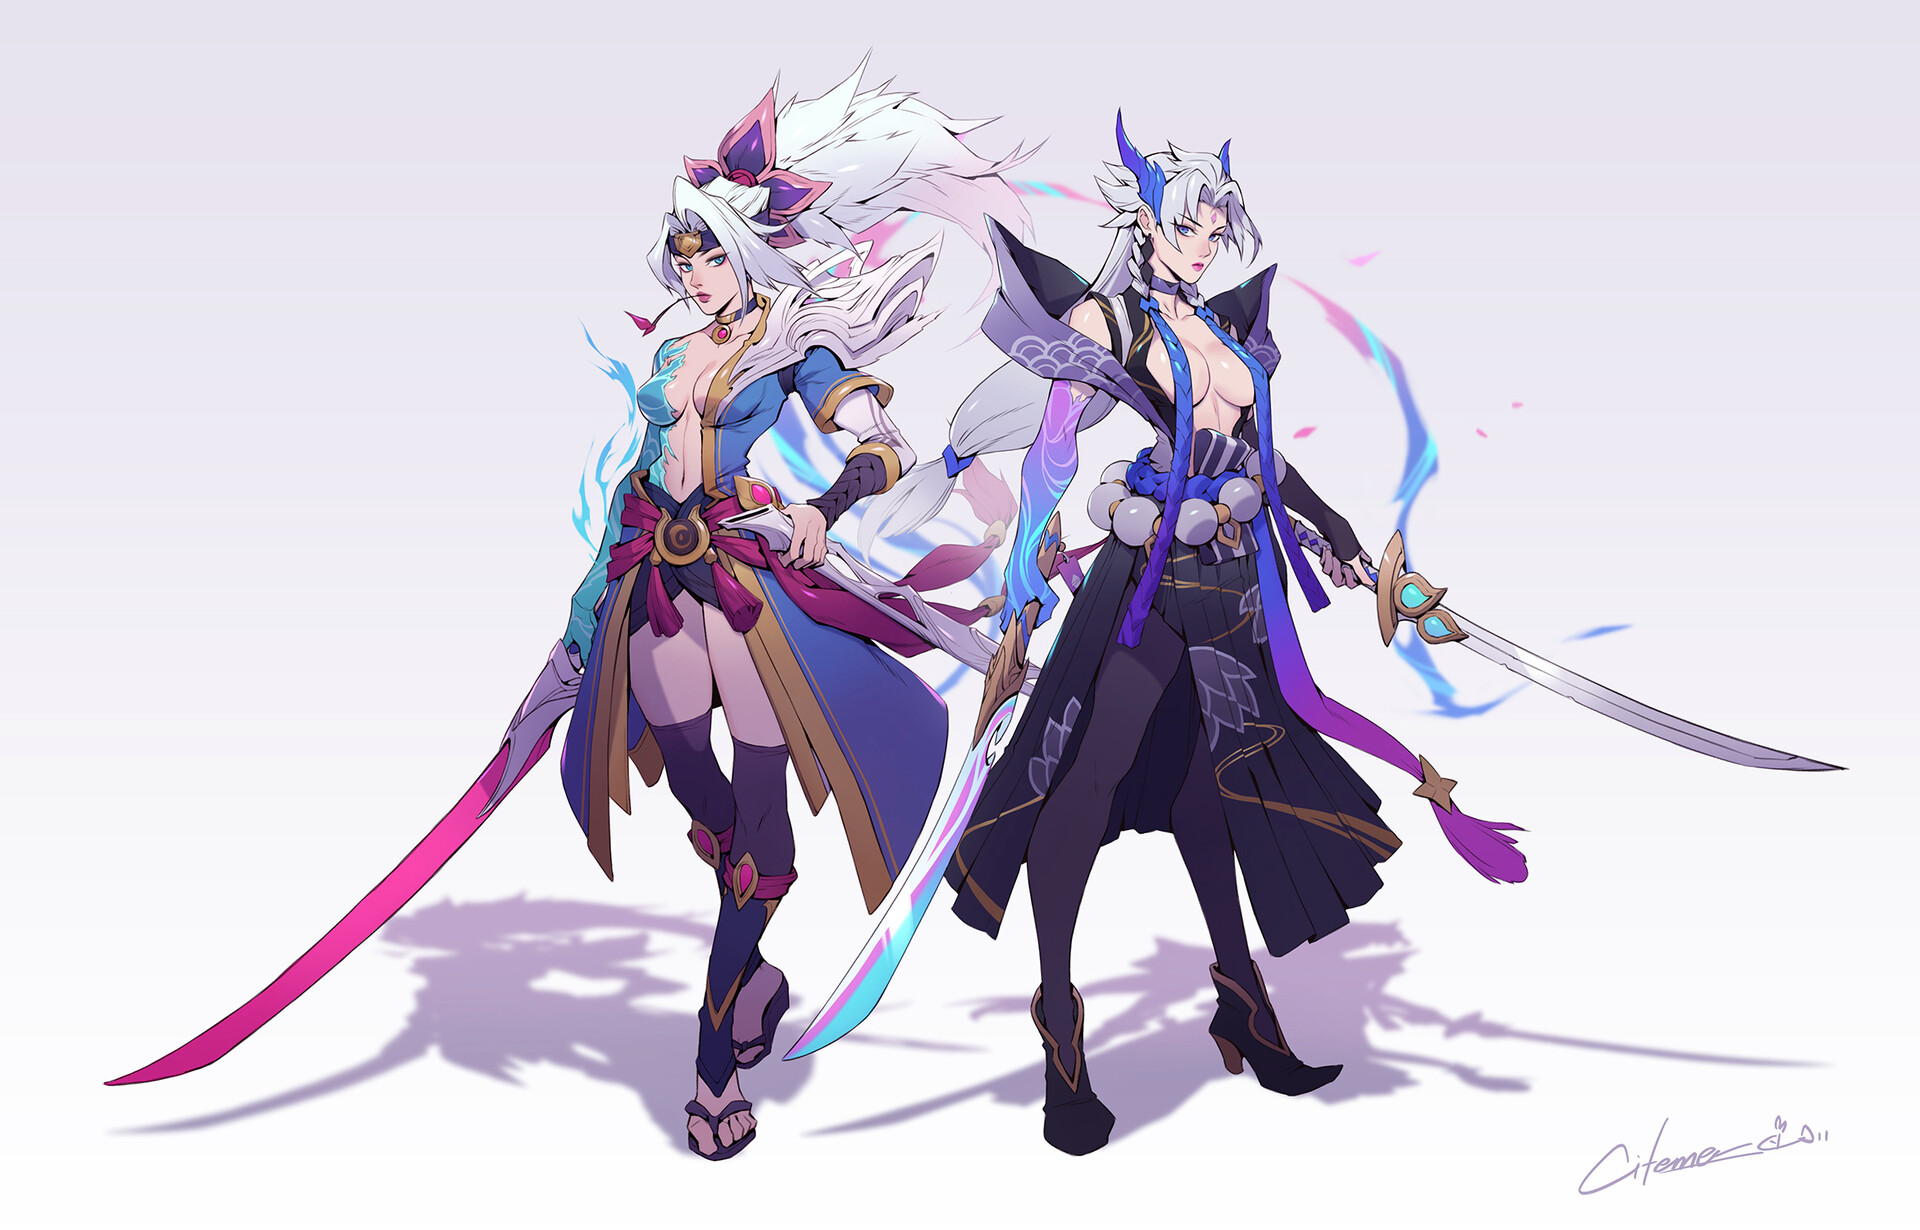 General 1920x1230 Citemer Liu drawing women genderswap League of Legends Yasuo (League of Legends) Spirit Blossom (League of Legends) skimpy clothes topless strategic covering hair over nipples dress fantasy art magician silver hair Yone (League of Legends)